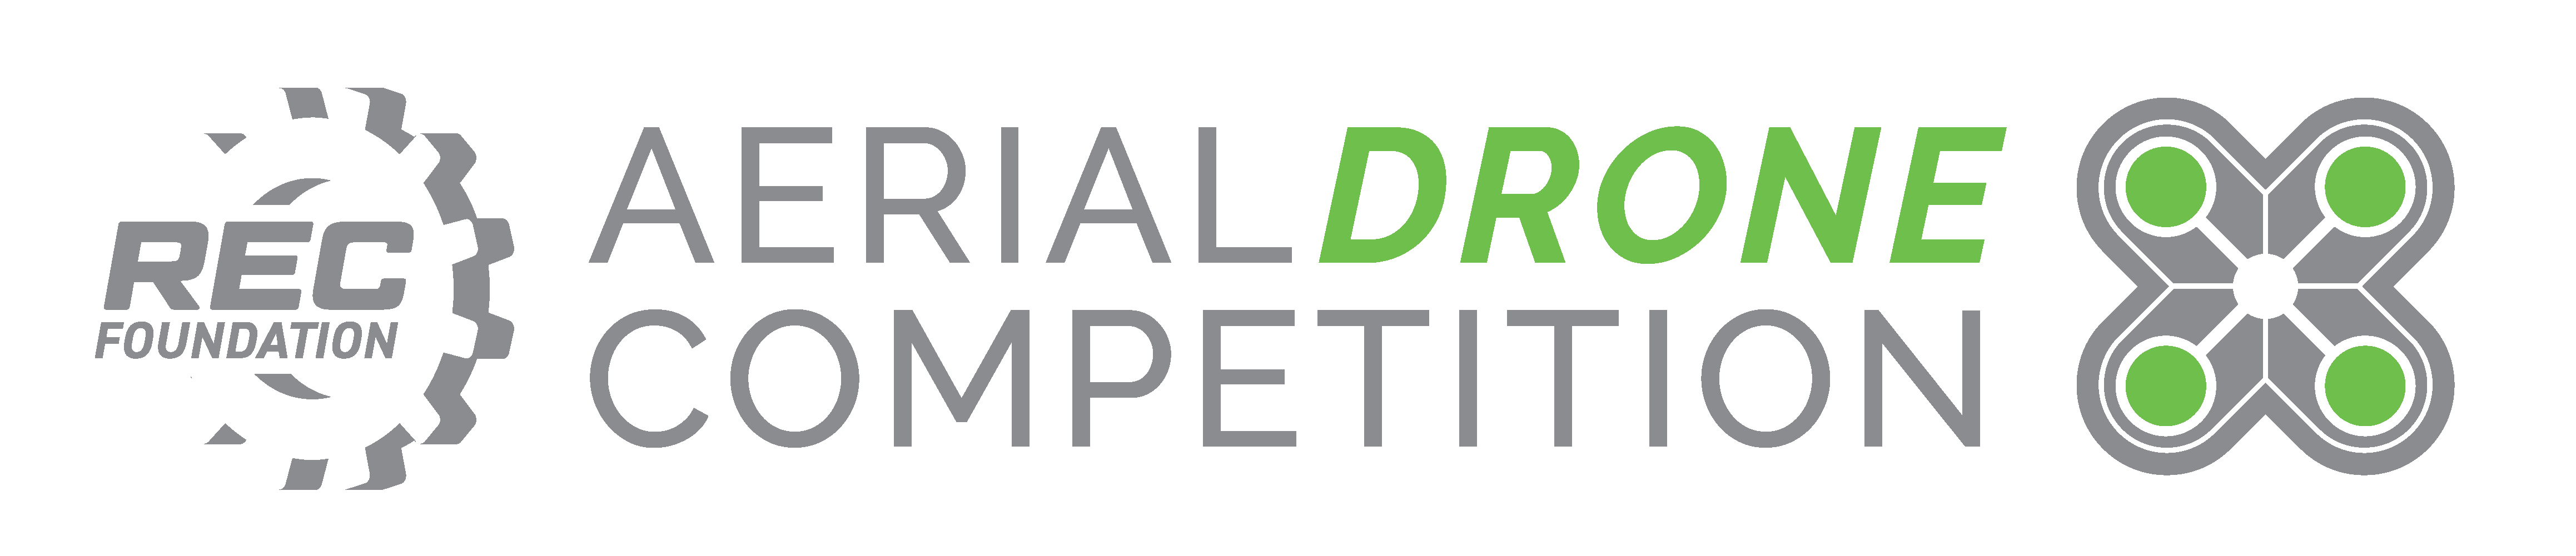 Aerial Drone Competition: Introduction to Hosting an Event Webinar and Q&A  - Tuesday August 16th - 7:15pm Central Time - hosted by REC Foundation